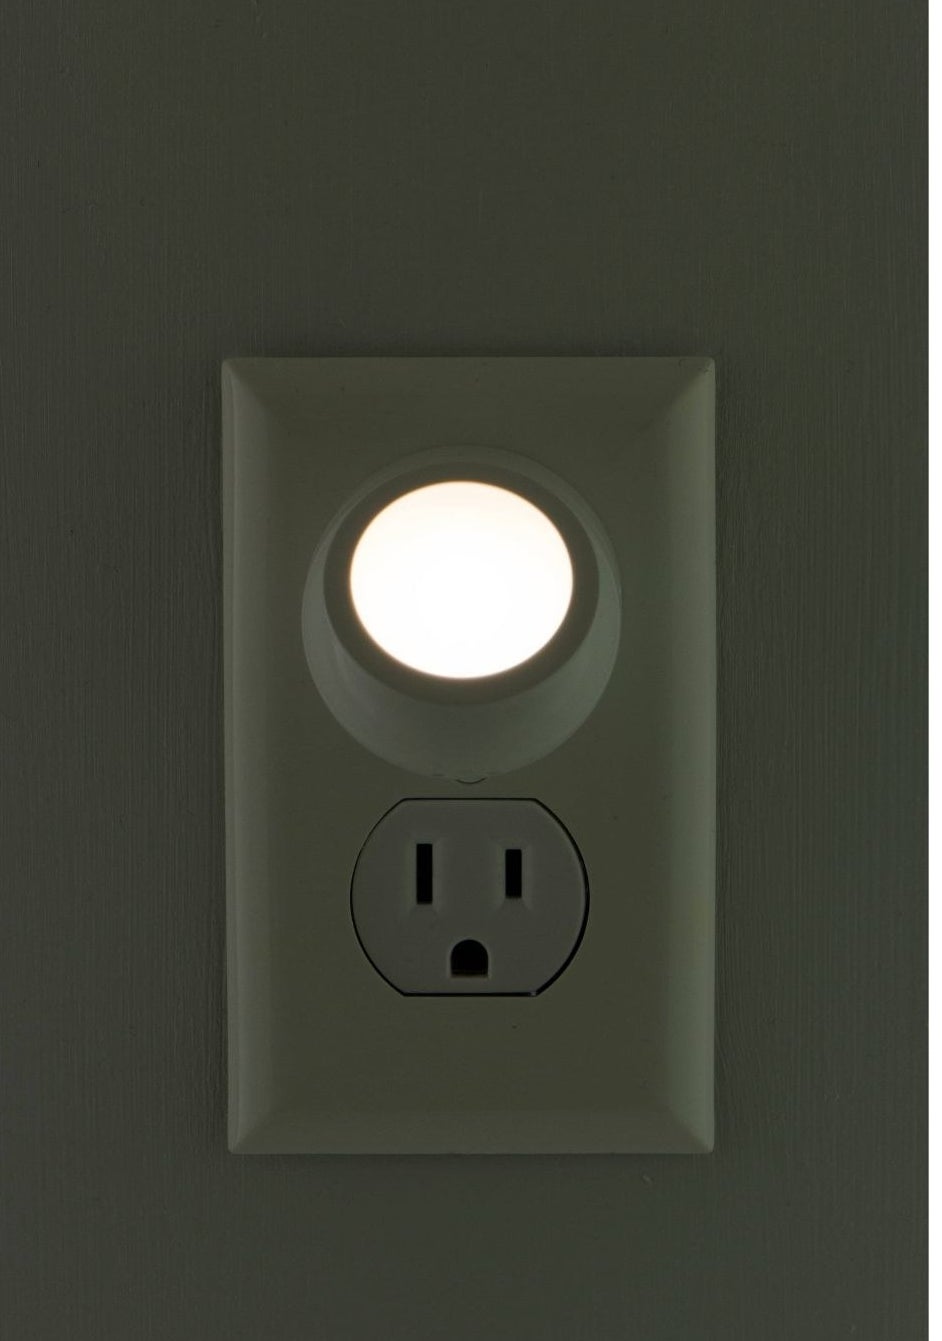 The nightlight, which plugs directly into an outlet